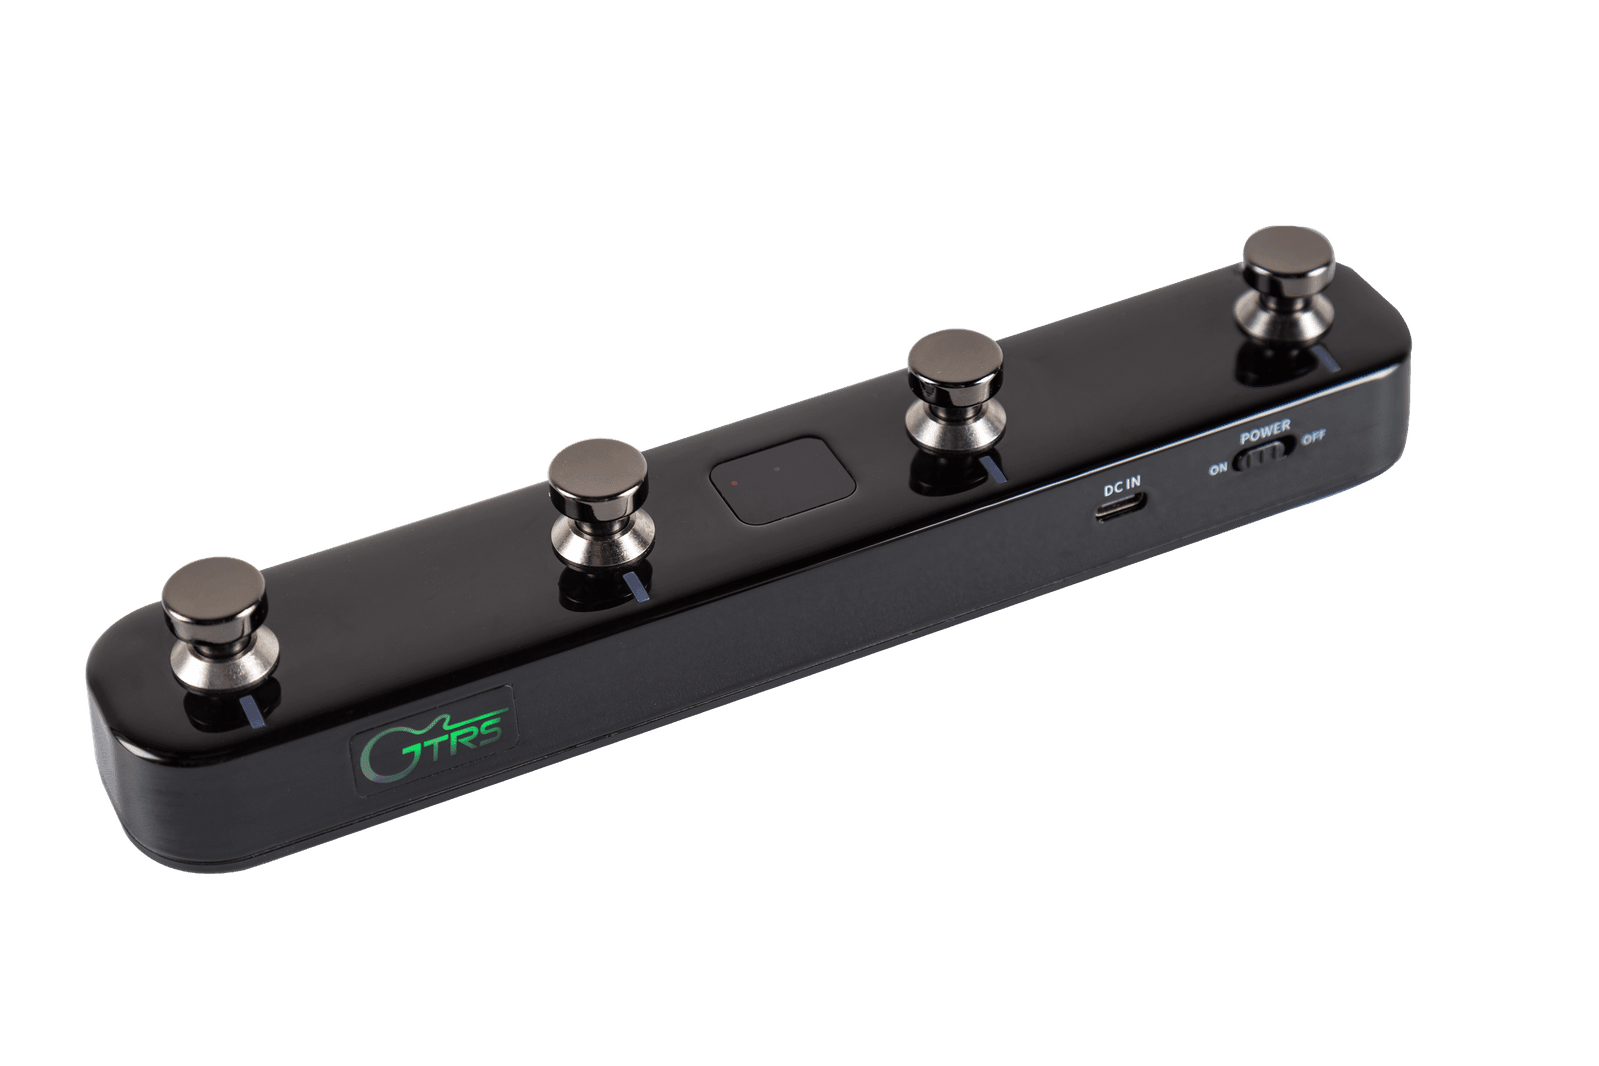 GTRS Bluetooth Footswitch for Intelligent Guitar - Guitar - Effects Pedals - Accessories by Mooer at Muso's Stuff